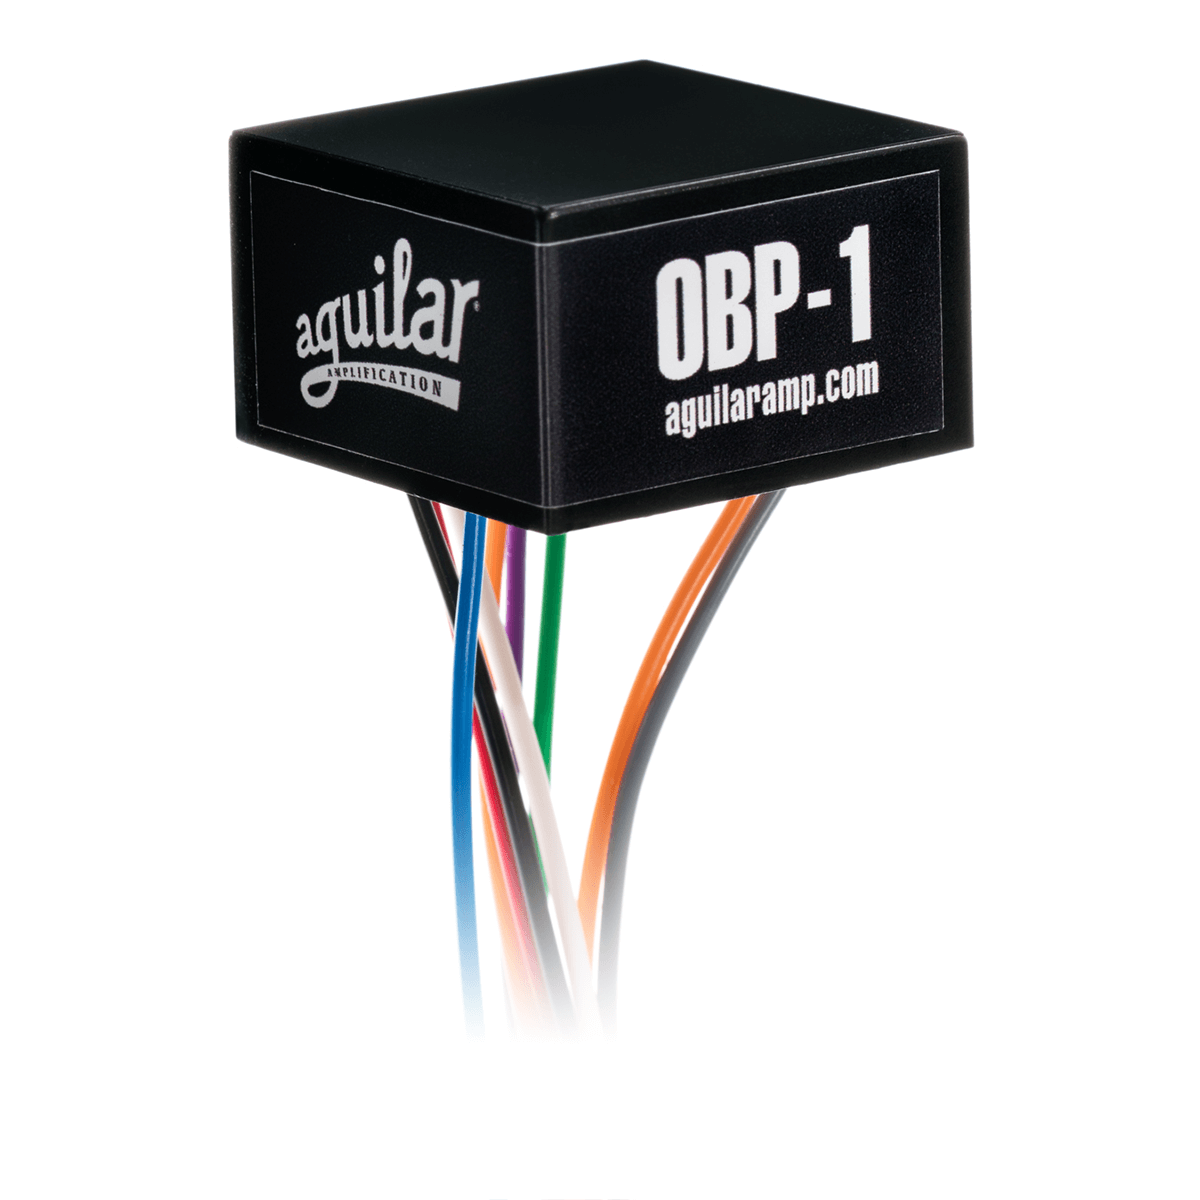 Aguilar Obp-1 Preamps